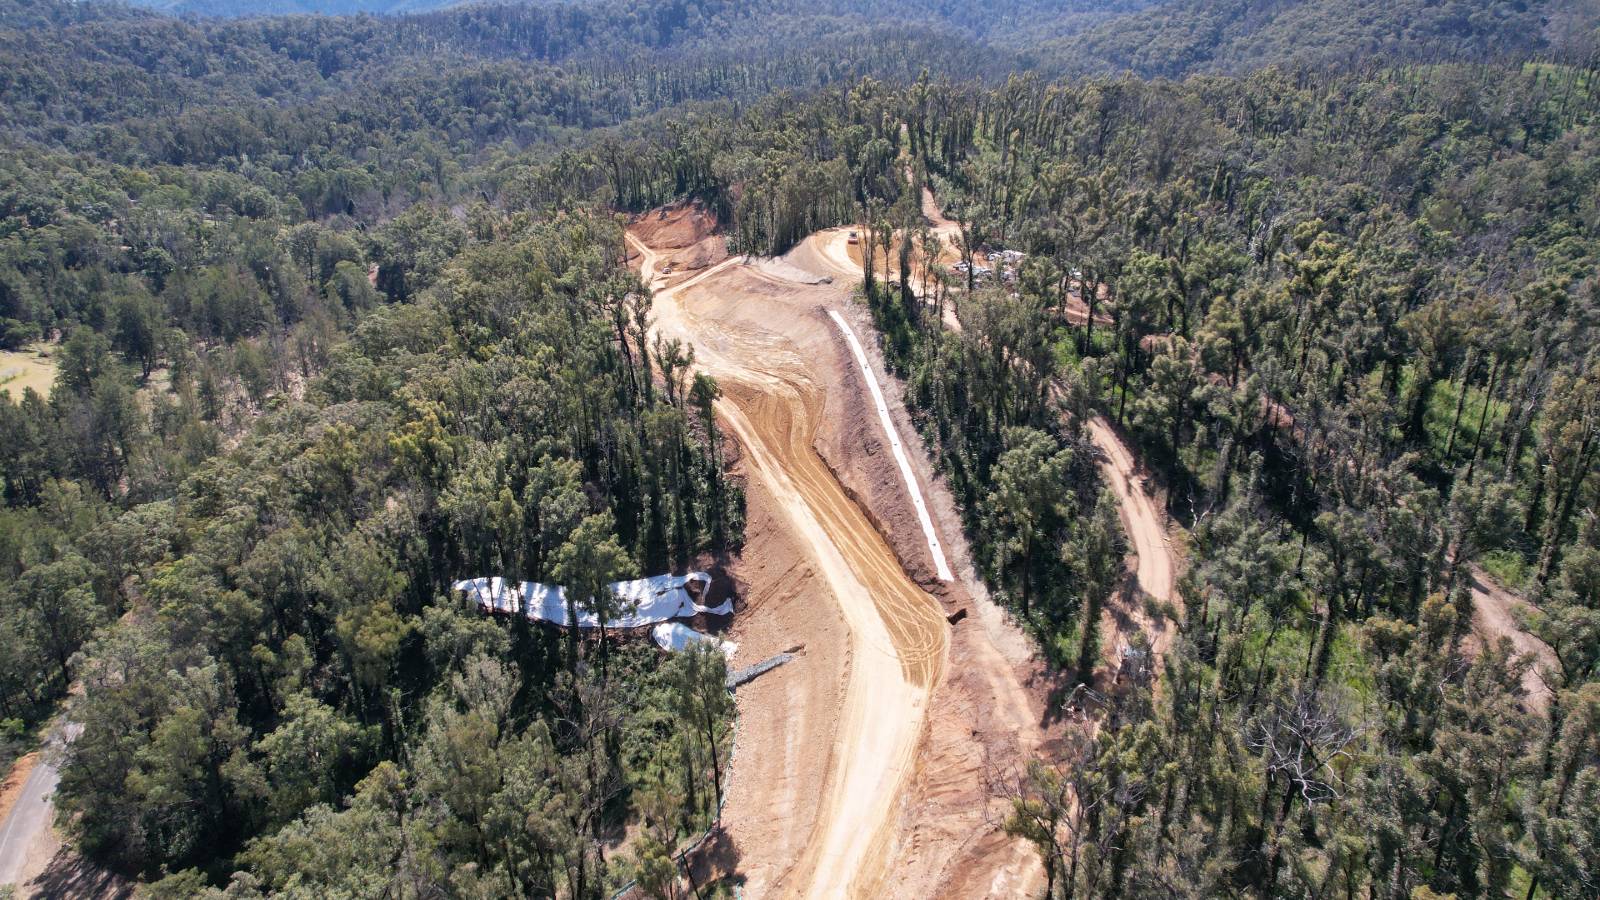 An aerial photo shows a dirt road under construction leading through a forest